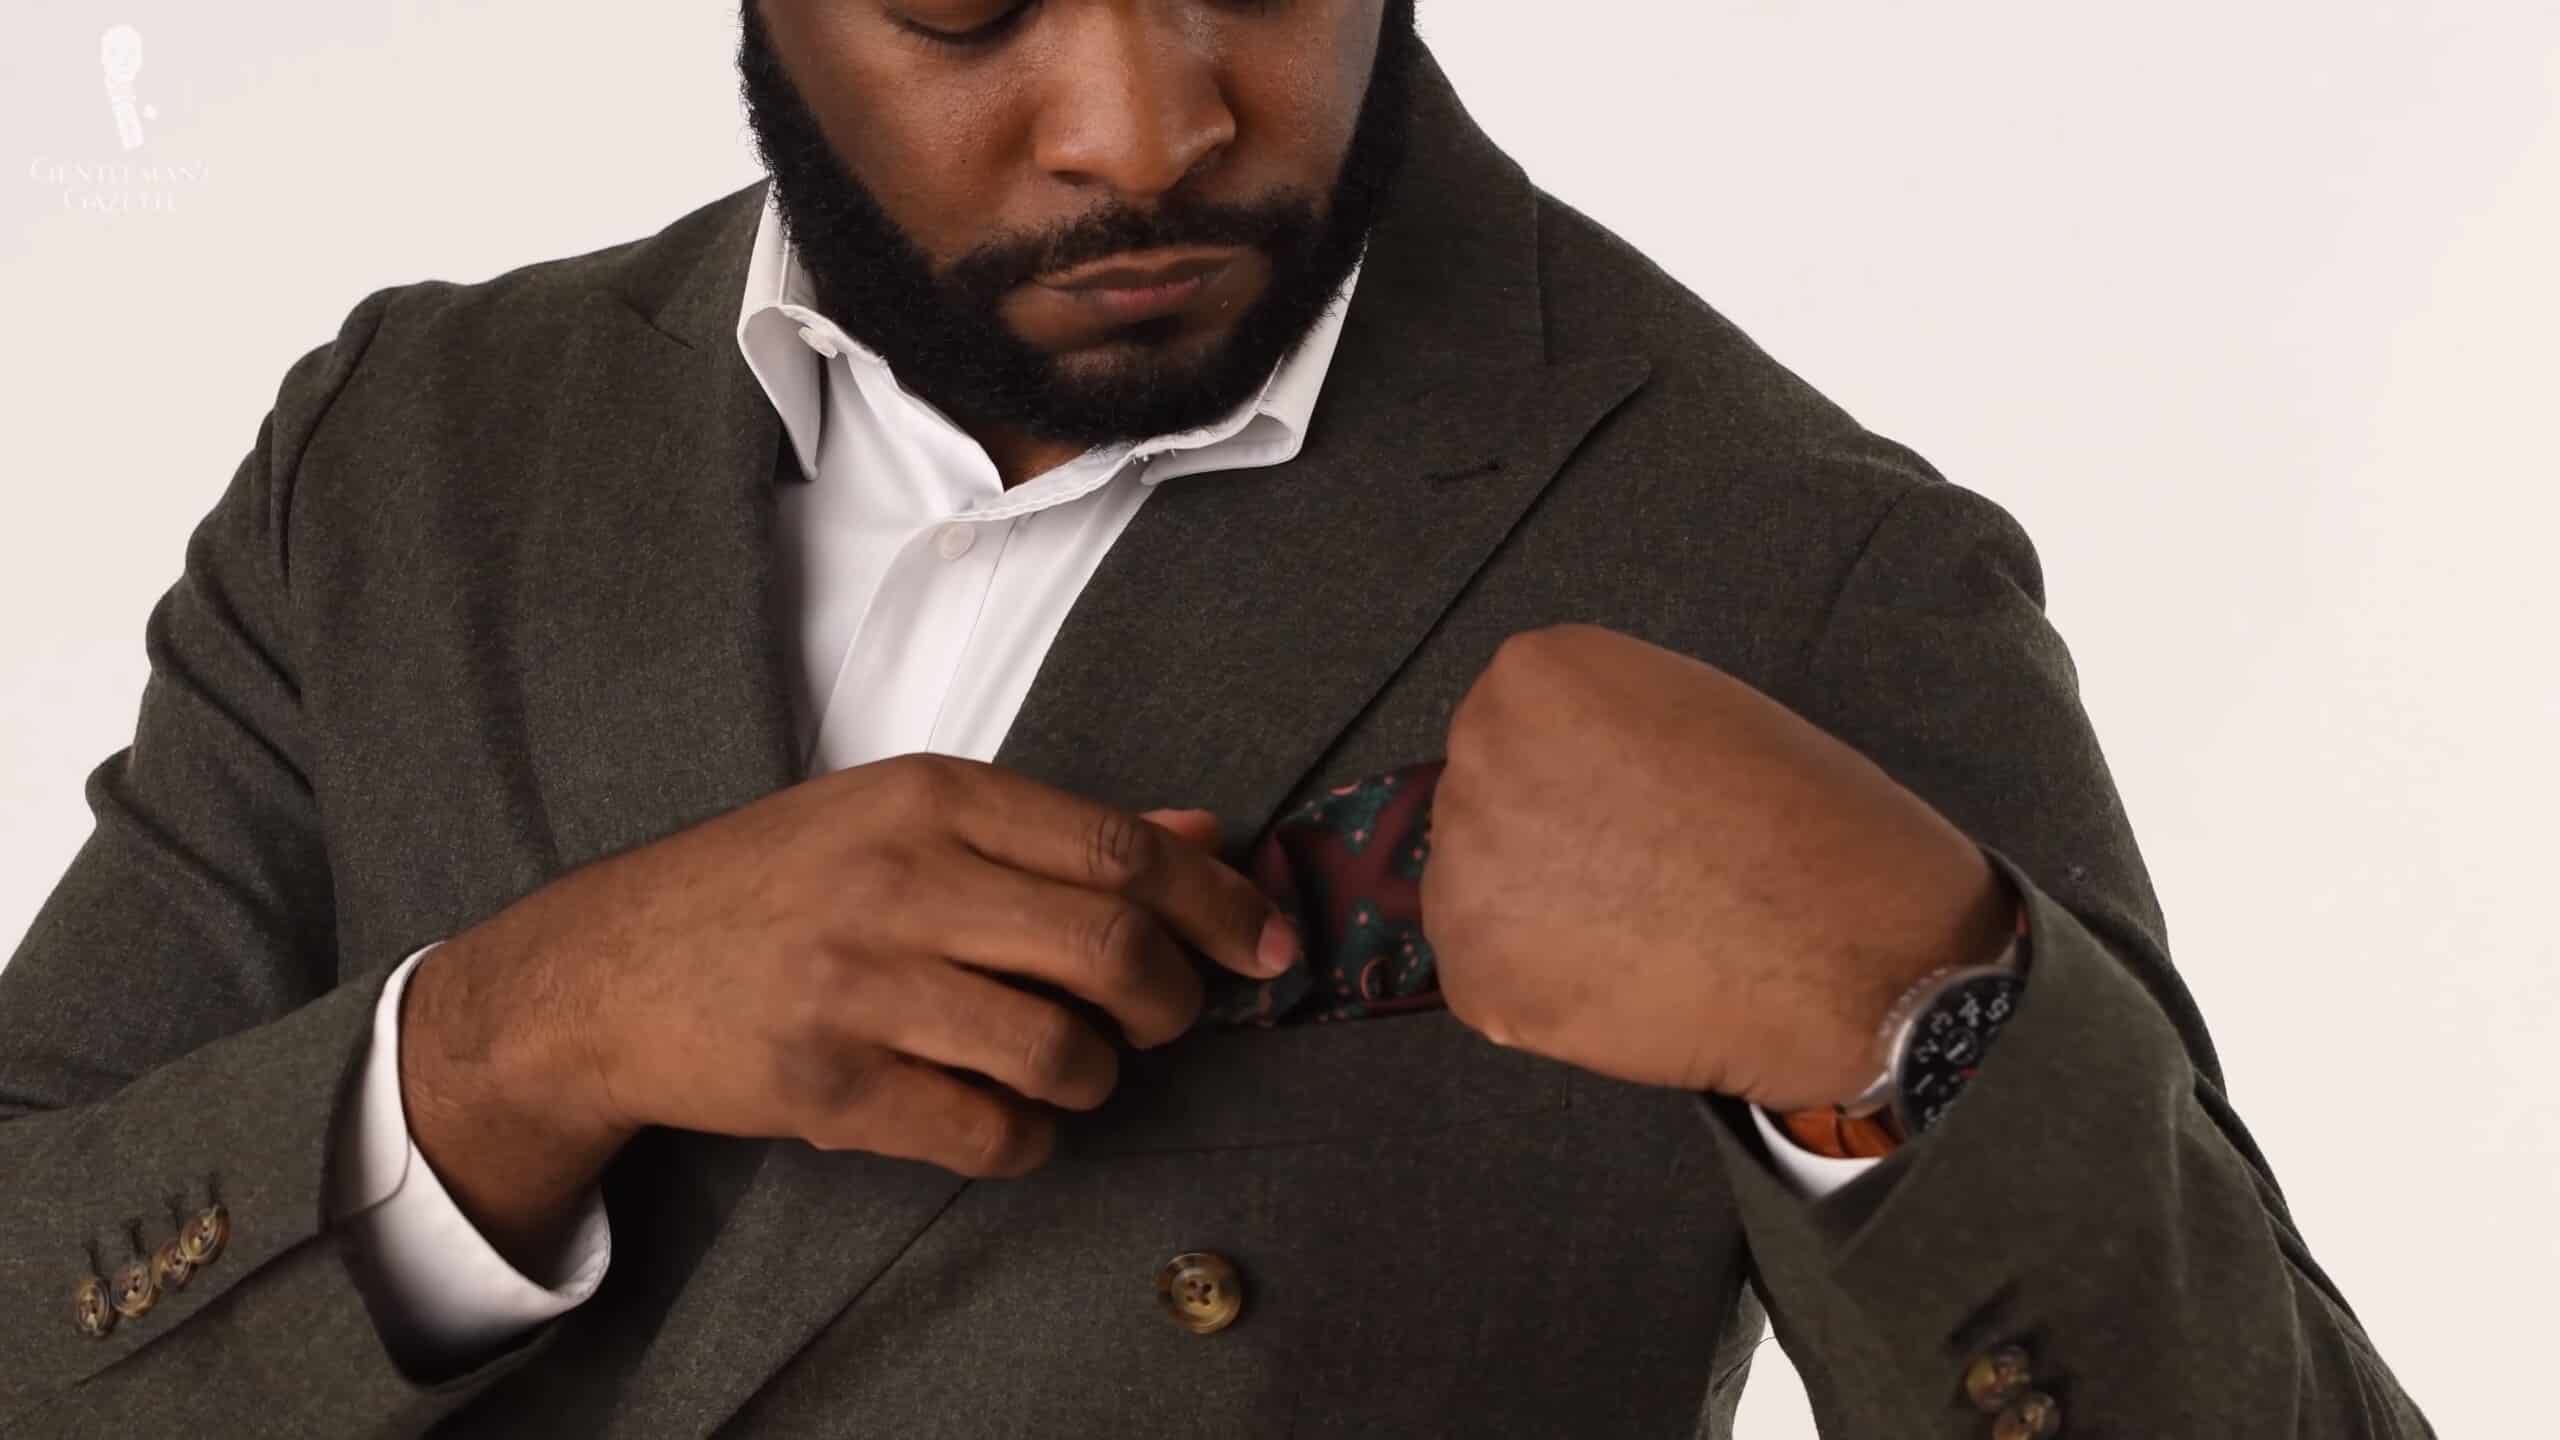 Kyle wearing an olive green suit jacket, Invicta watch, and Fort Belvedere pocket square